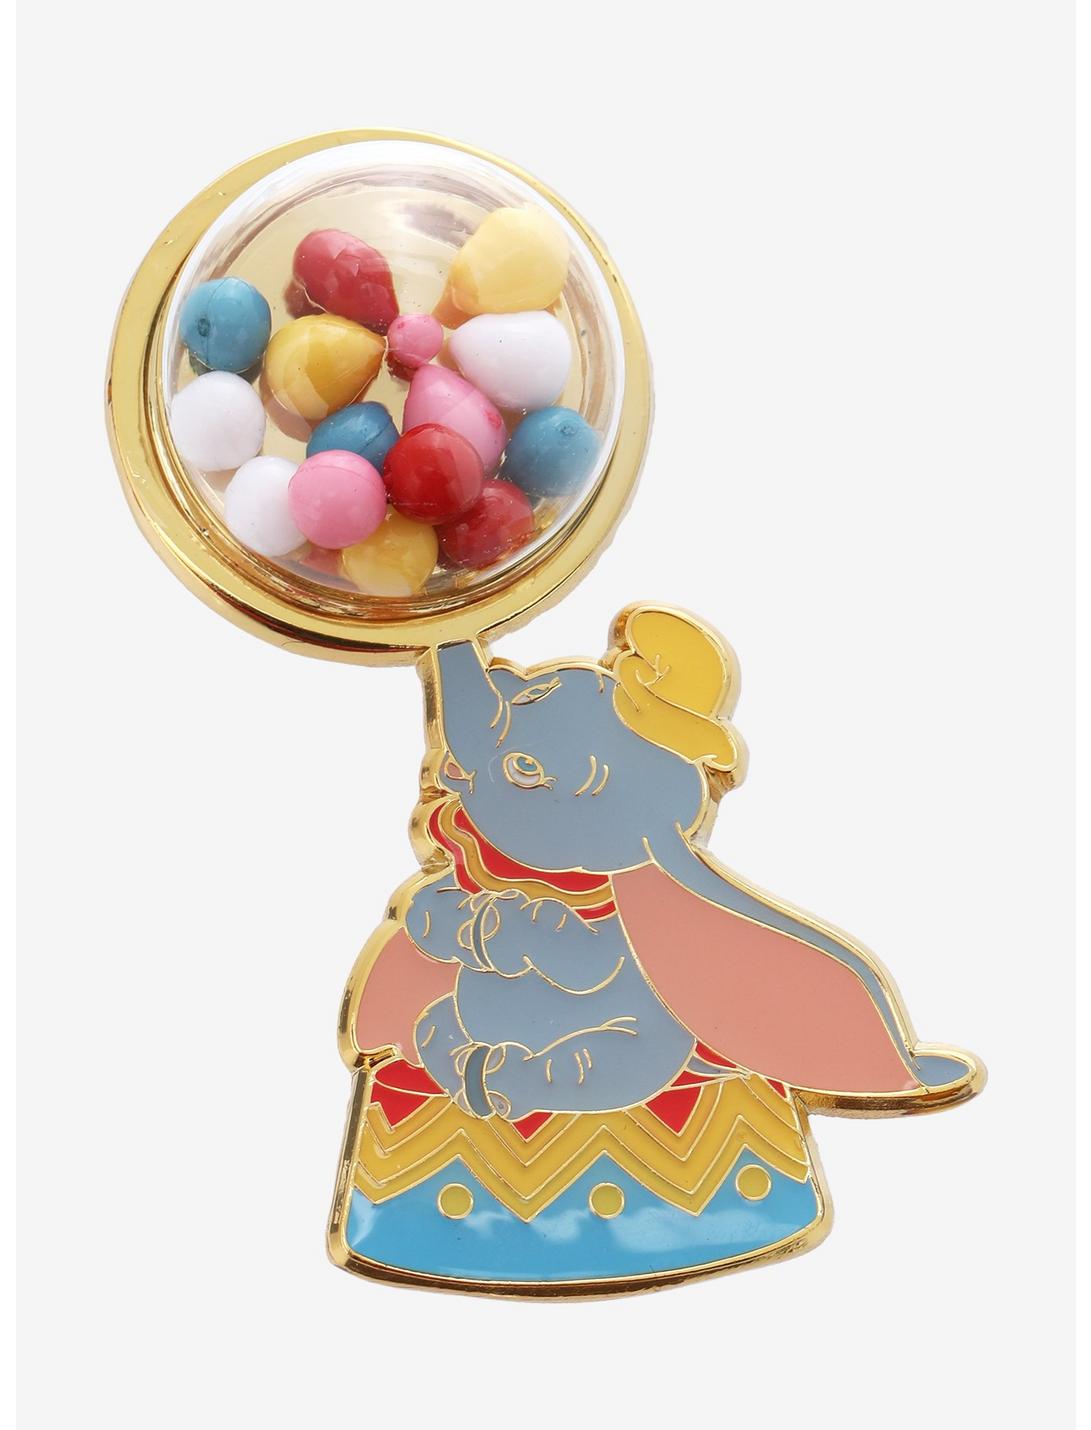 Loungefly Disney Dumbo Ball Enamel Pin - BoxLunch Exclusive, , hi-res